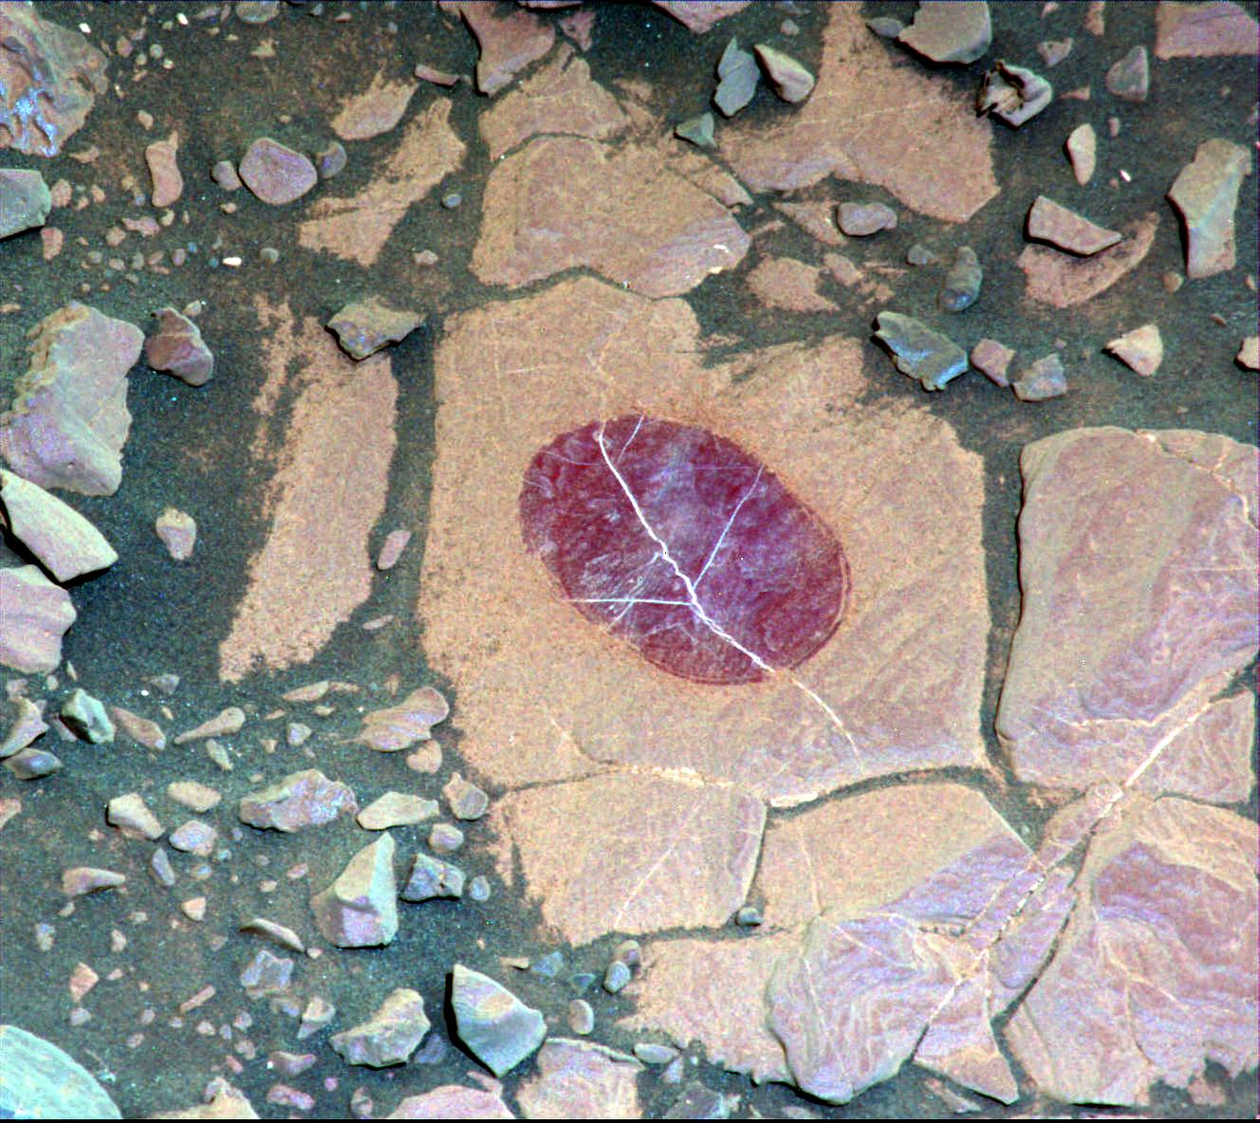 This false-color image shows how special filters of the Curiosity Mars rover's Mastcam can help reveal certain minerals in target rocks. It is a composite of images taken Sept. 17, 2017, through three "science" filters chosen to make hematite, an iron-oxide mineral, stand out as exaggerated purple.